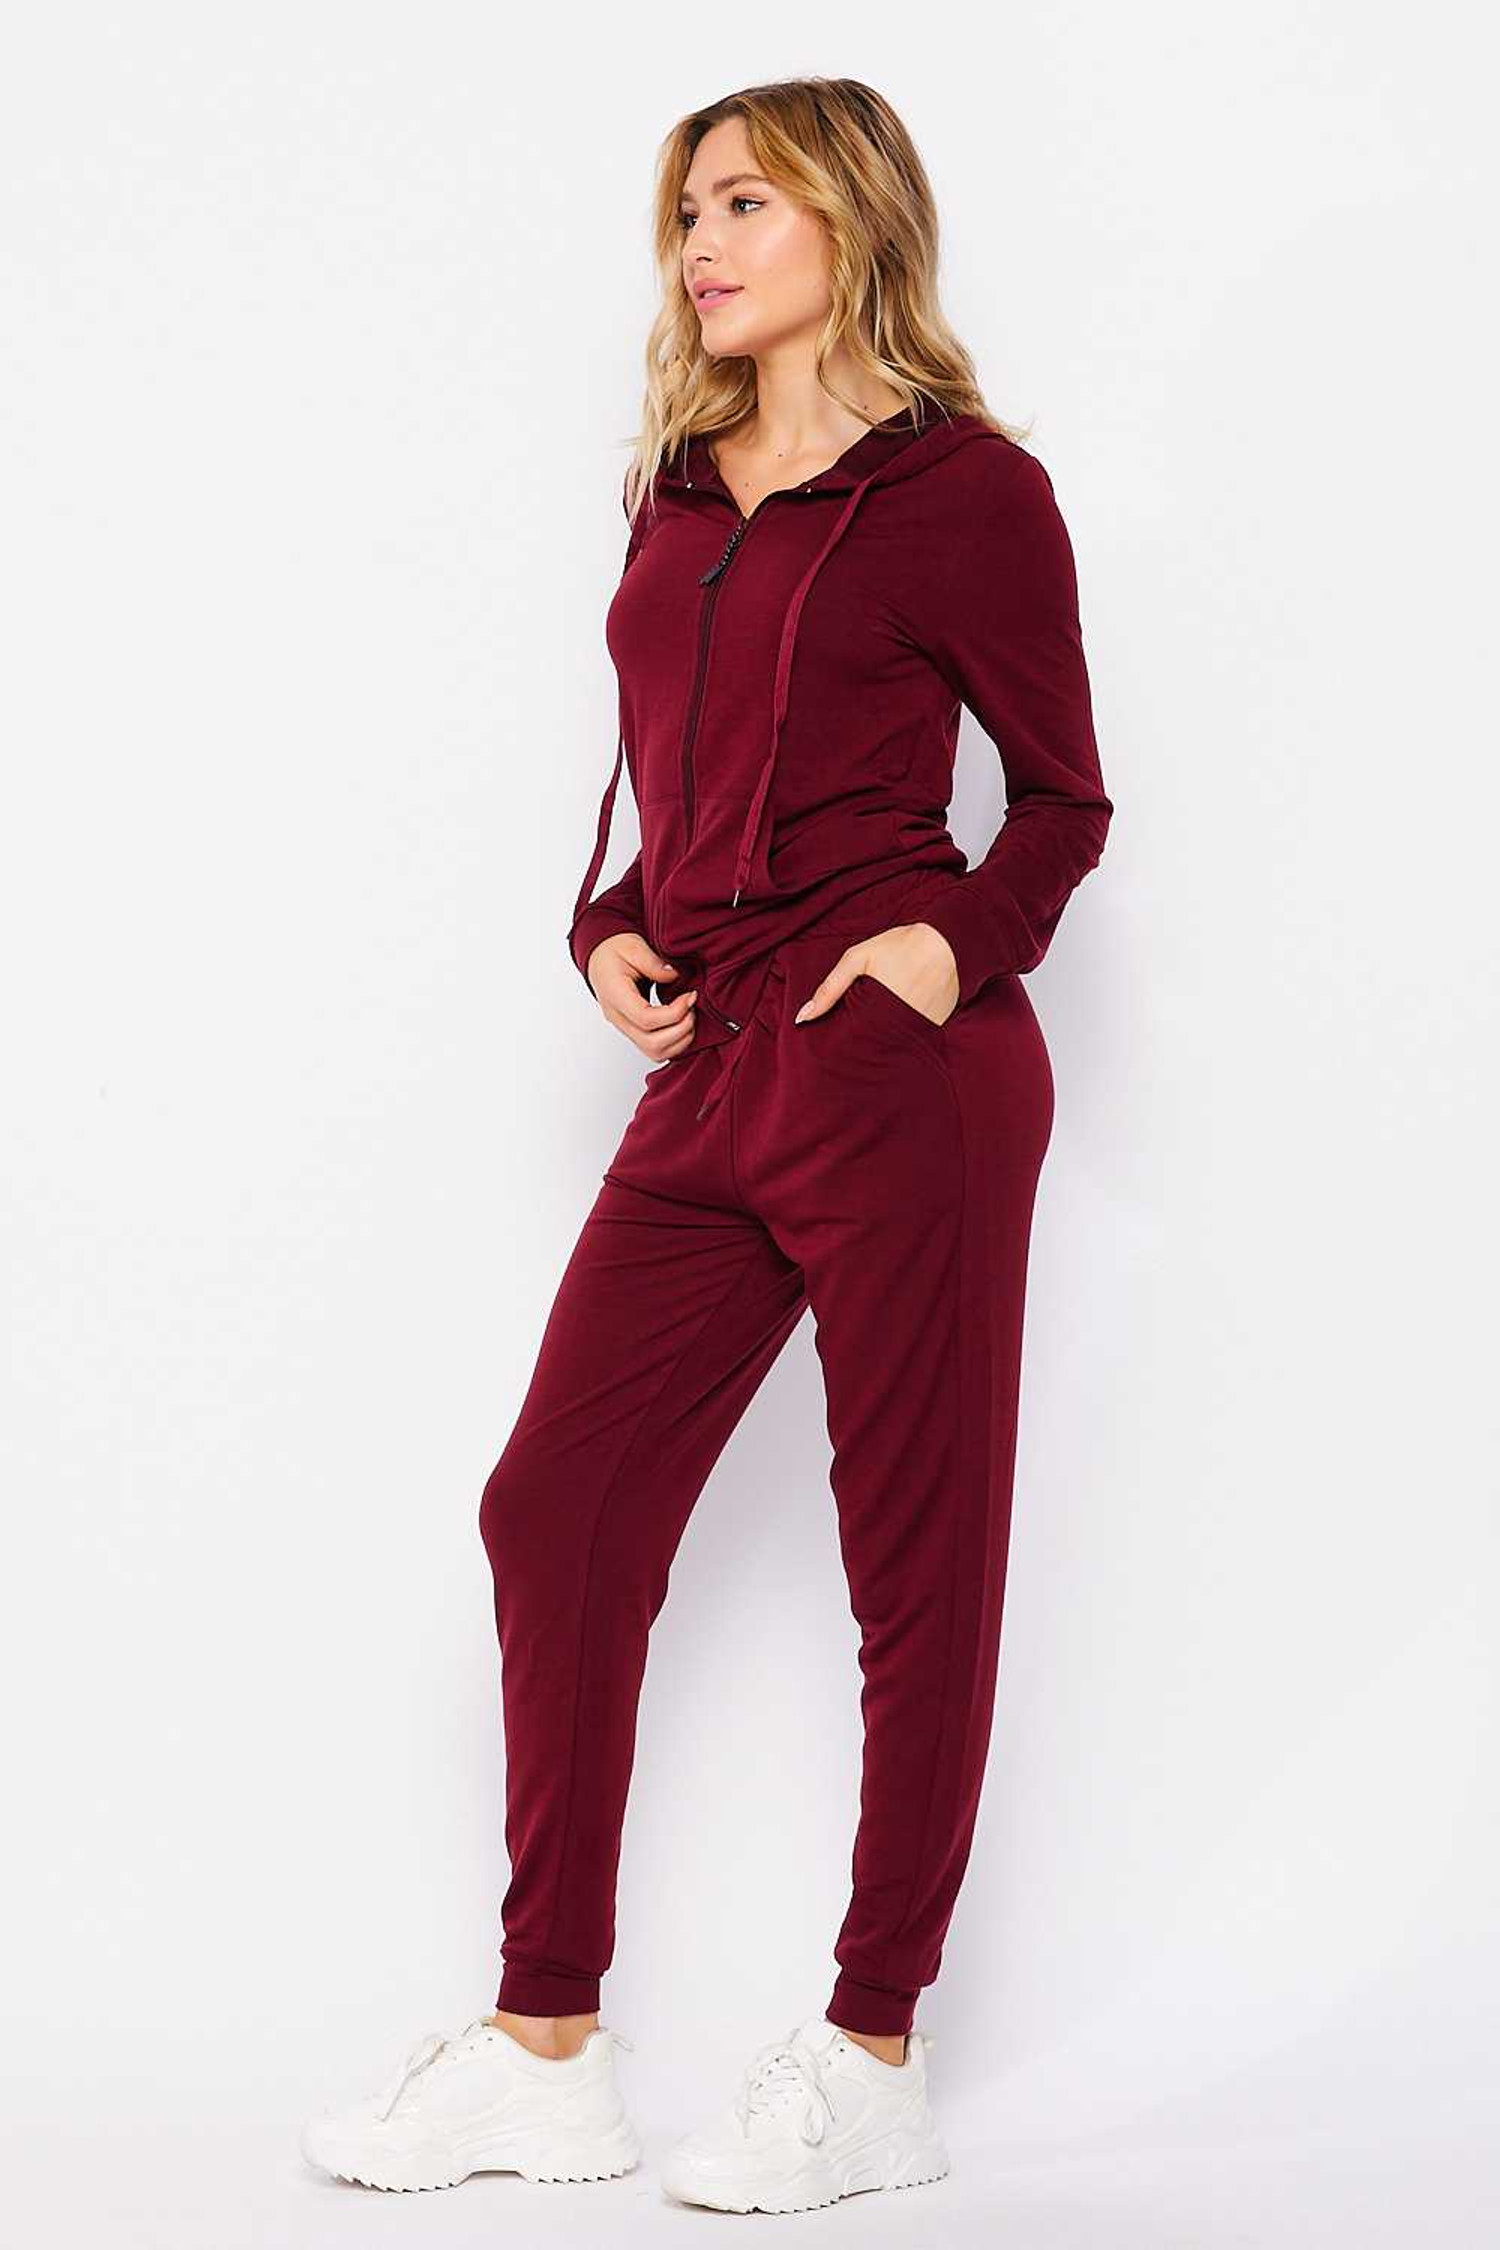 2 Piece French Terry Joggers and Hoodie Set | USA Fashion